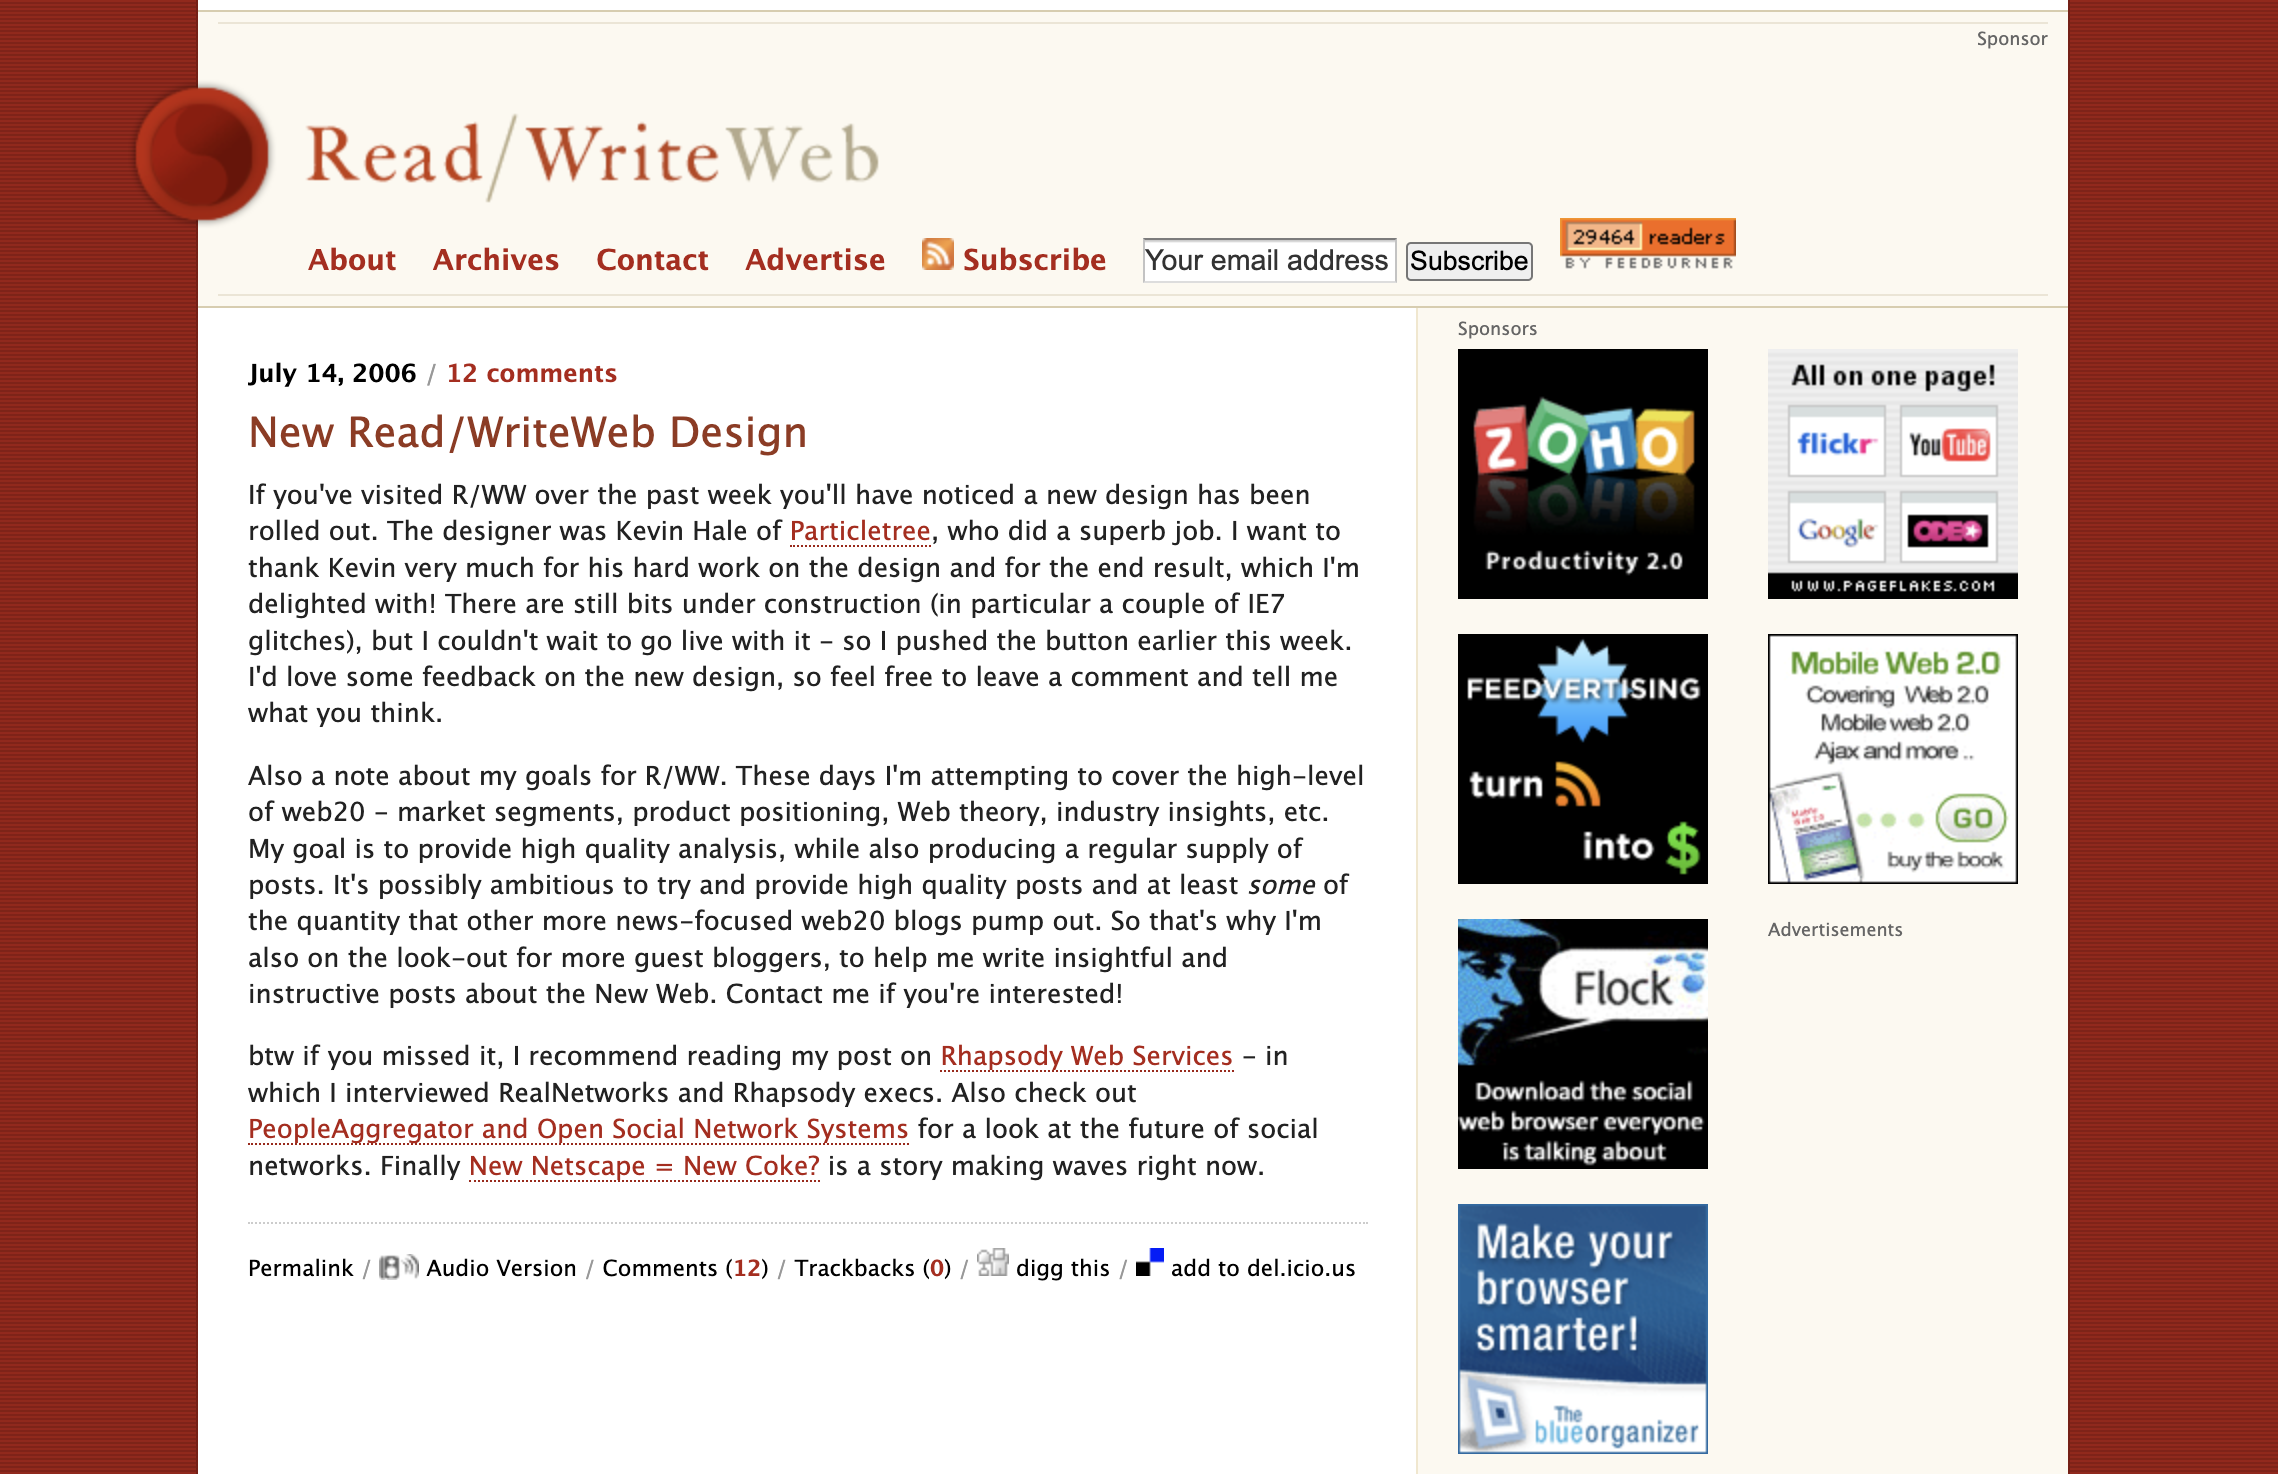 The new design: screenshot of RWW in July 2006